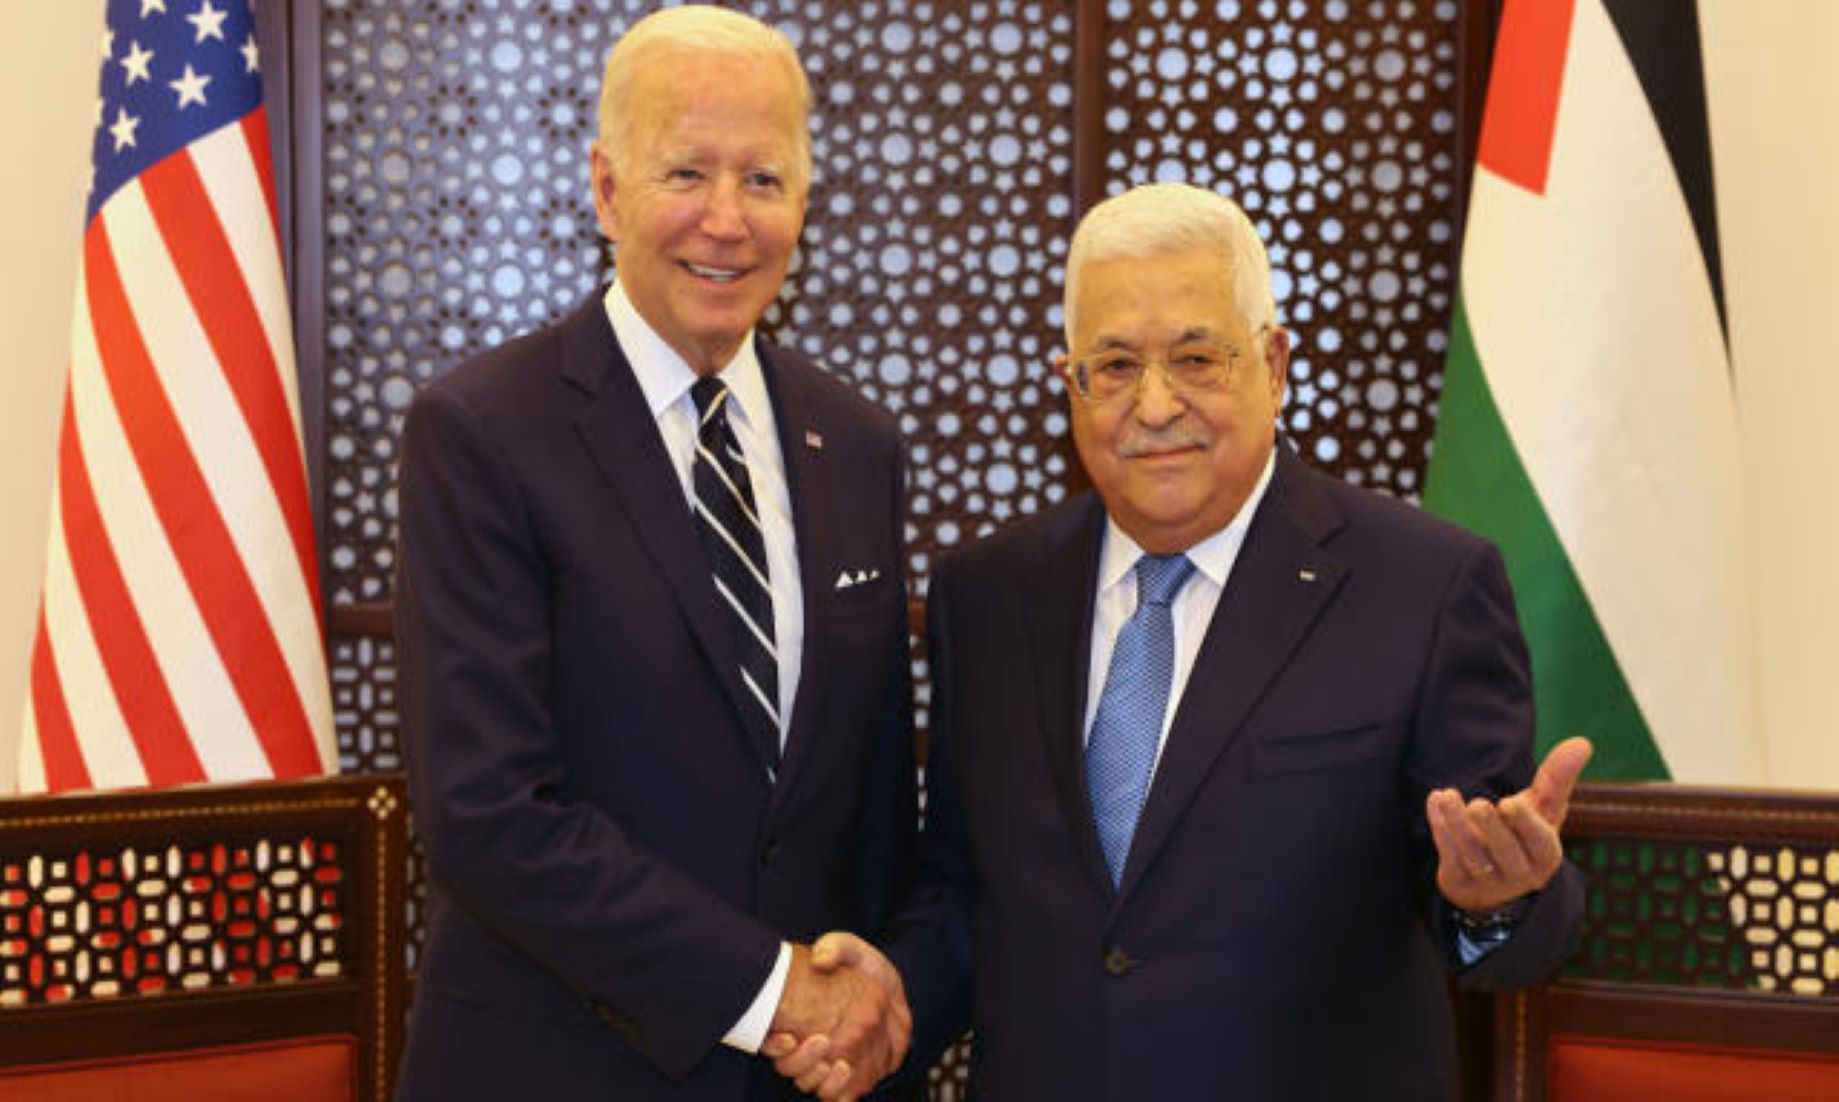 Biden Voiced Support For Two-State Solution, Pledged Aid To Palestinians